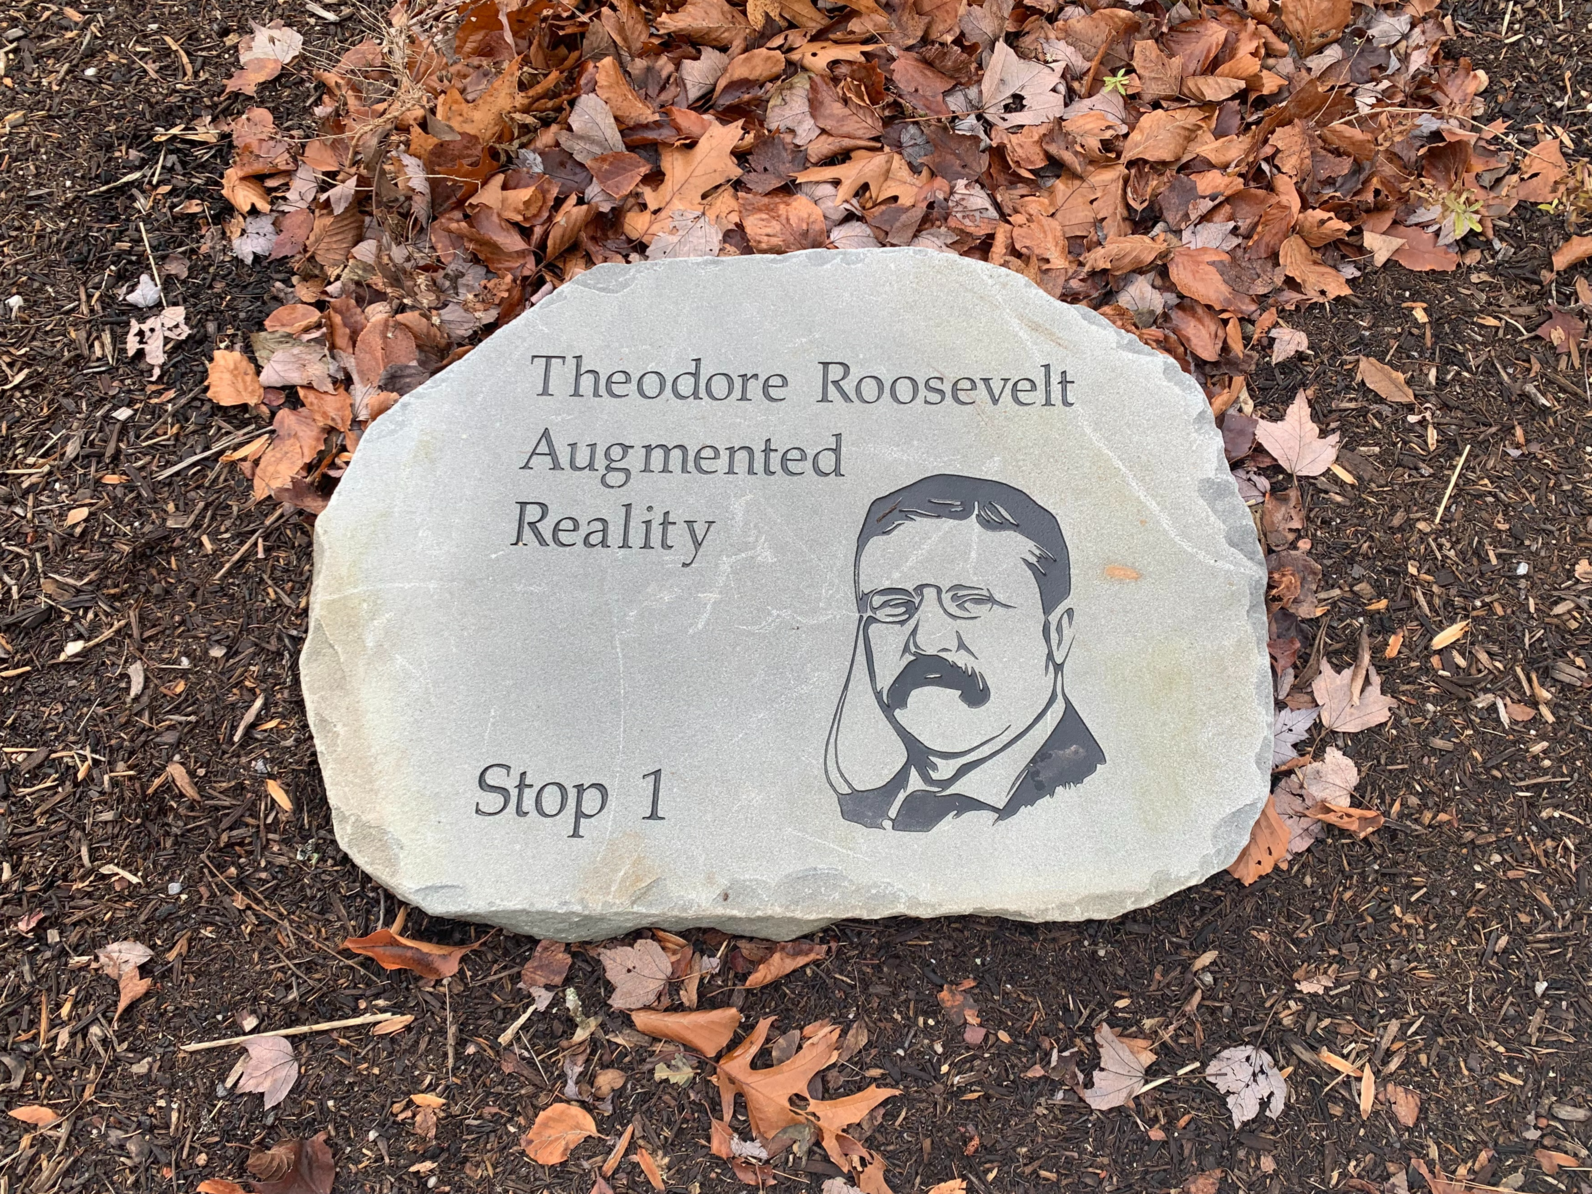 A large, flat stone on the ground with a bust of Theodore Roosevelt engraved into it. Engraved text on the stone reads: Stop 1